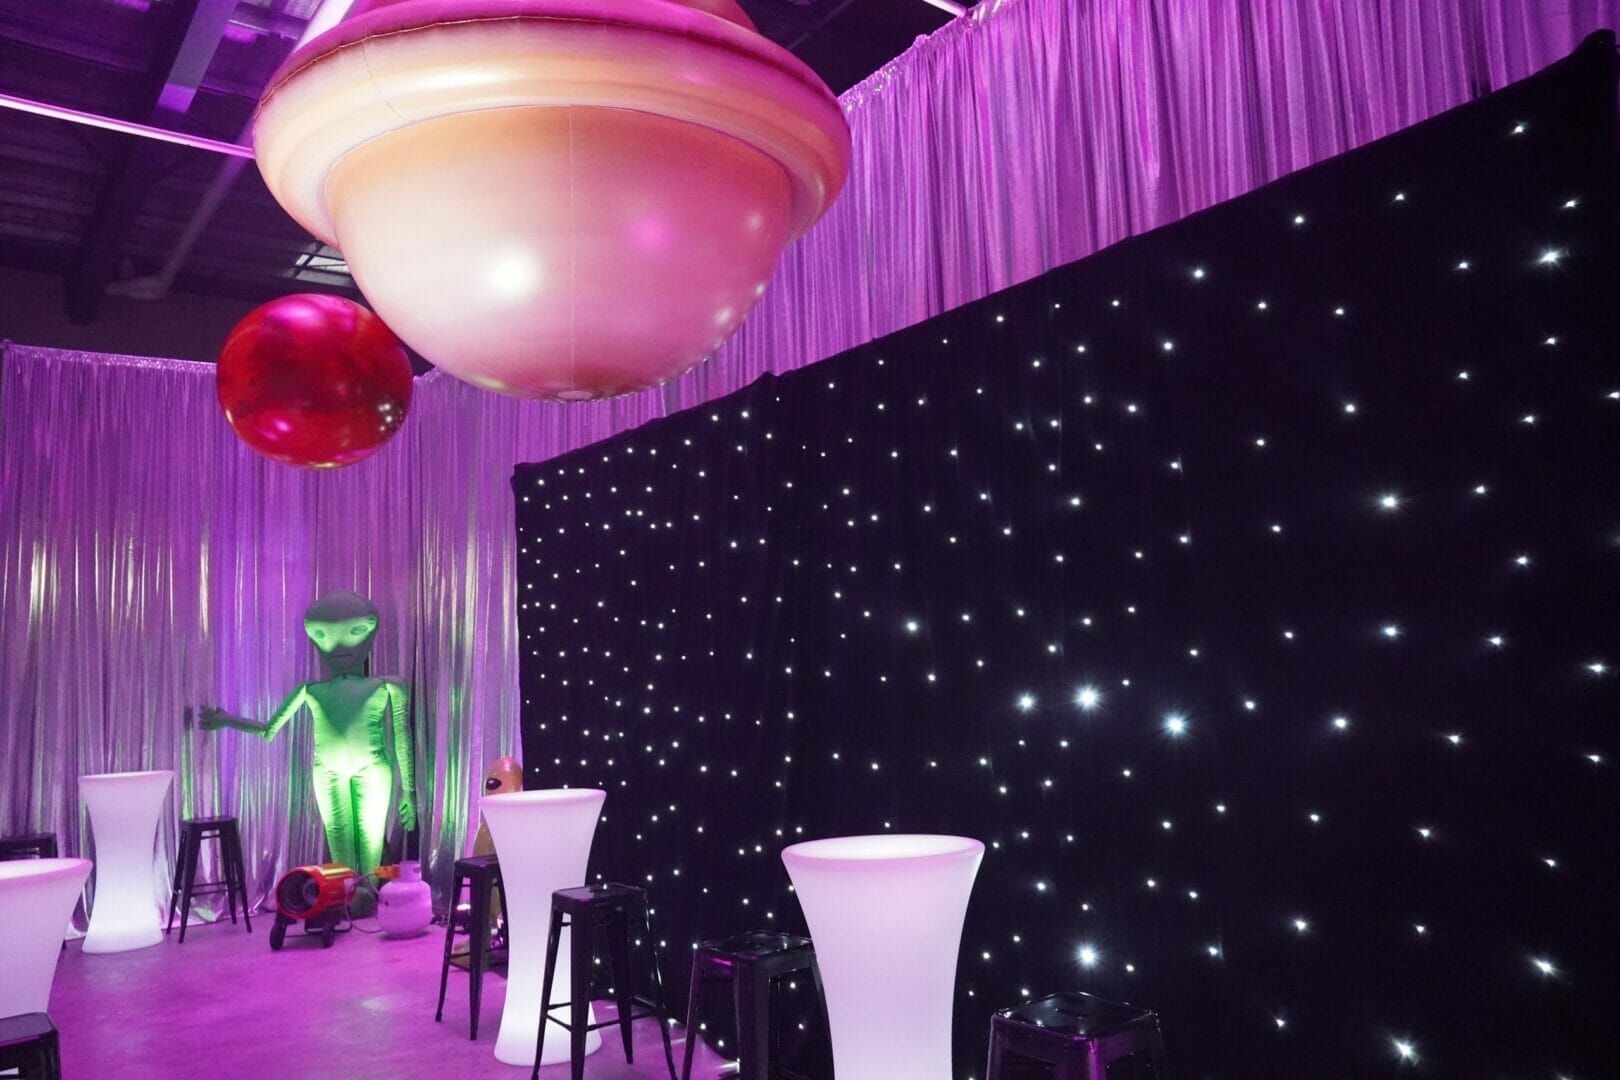 star cloth, illuminated furniture and inflatable planet at space themed party